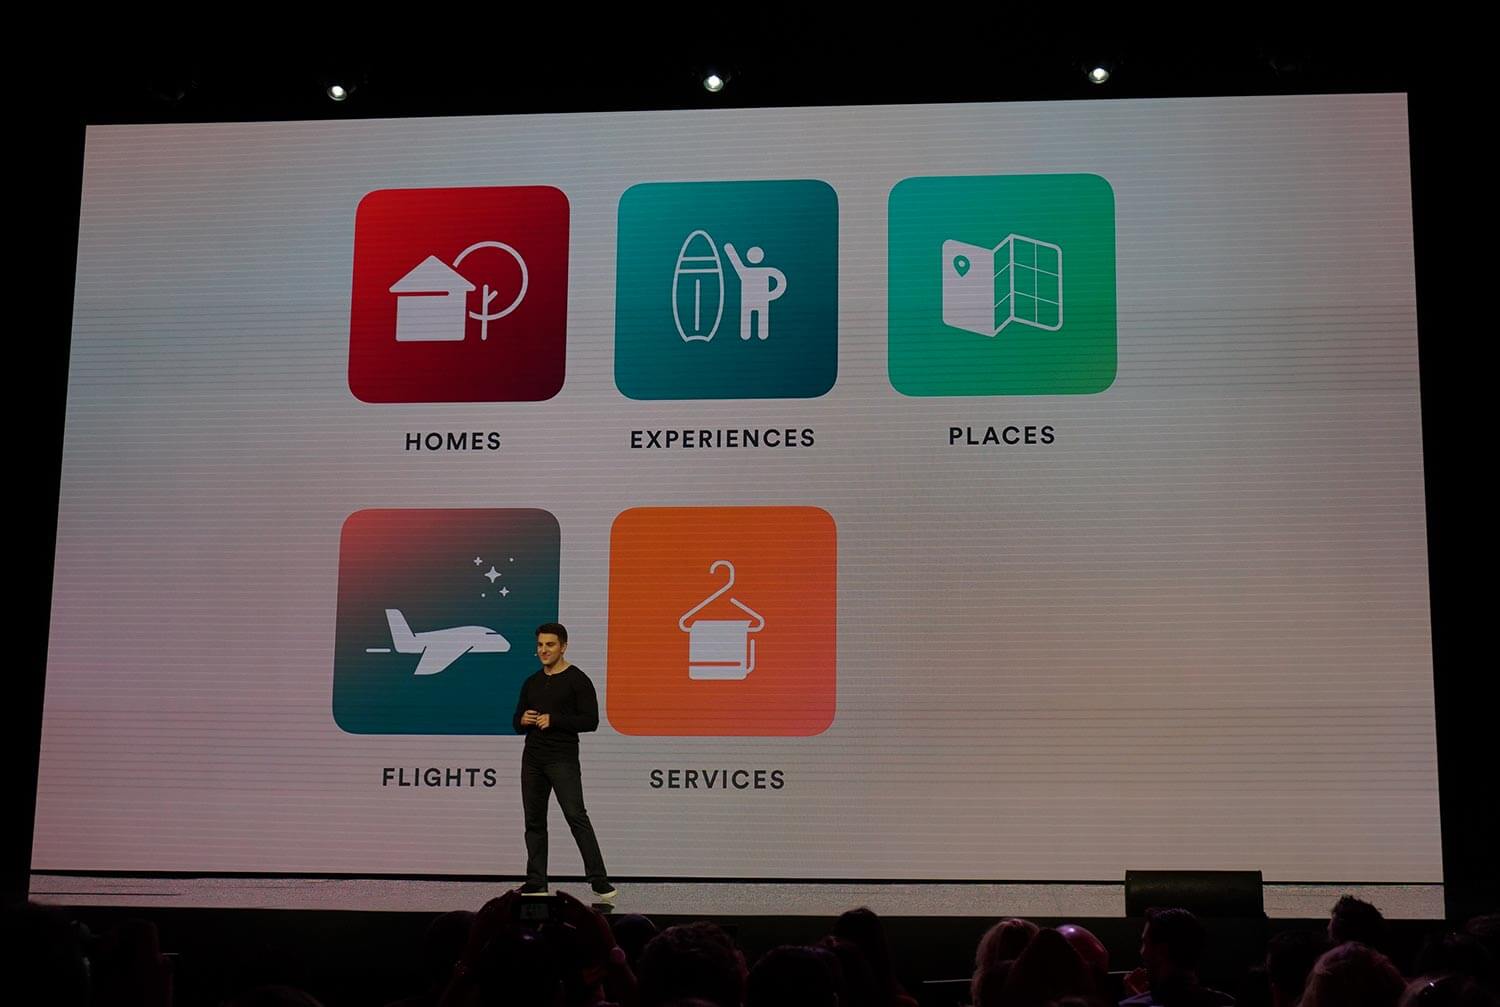 Airbnb chief executive Brian Chesky highlights that the company will soon expand into other trip-related areas, including flights and services.